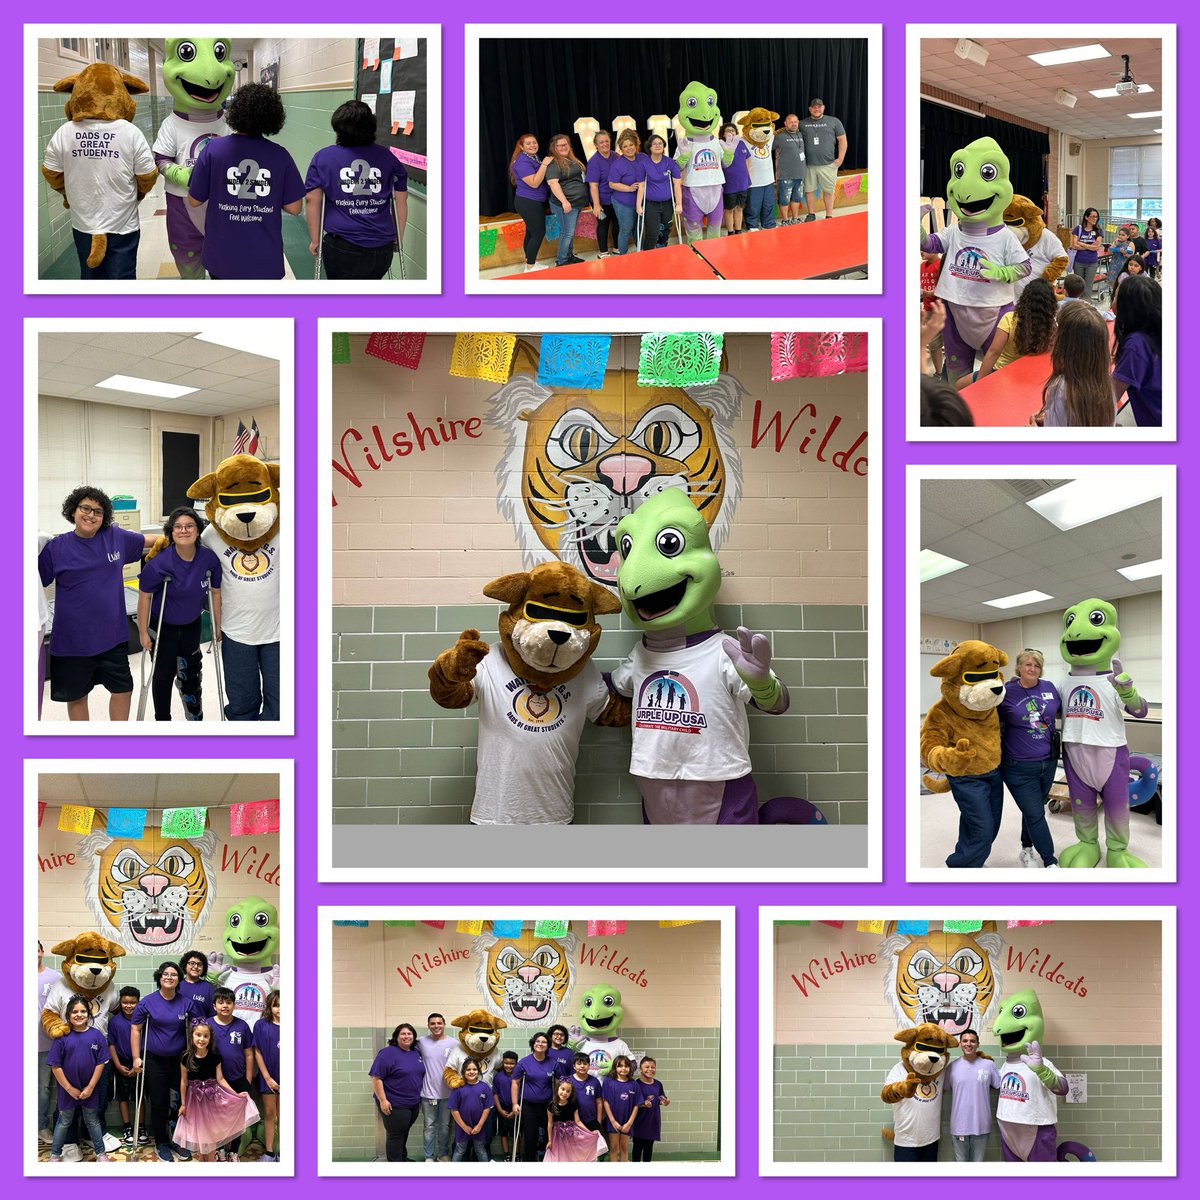 Traveled all around the city and visited some wonderful schools celebrating the military child! #purpleupusa